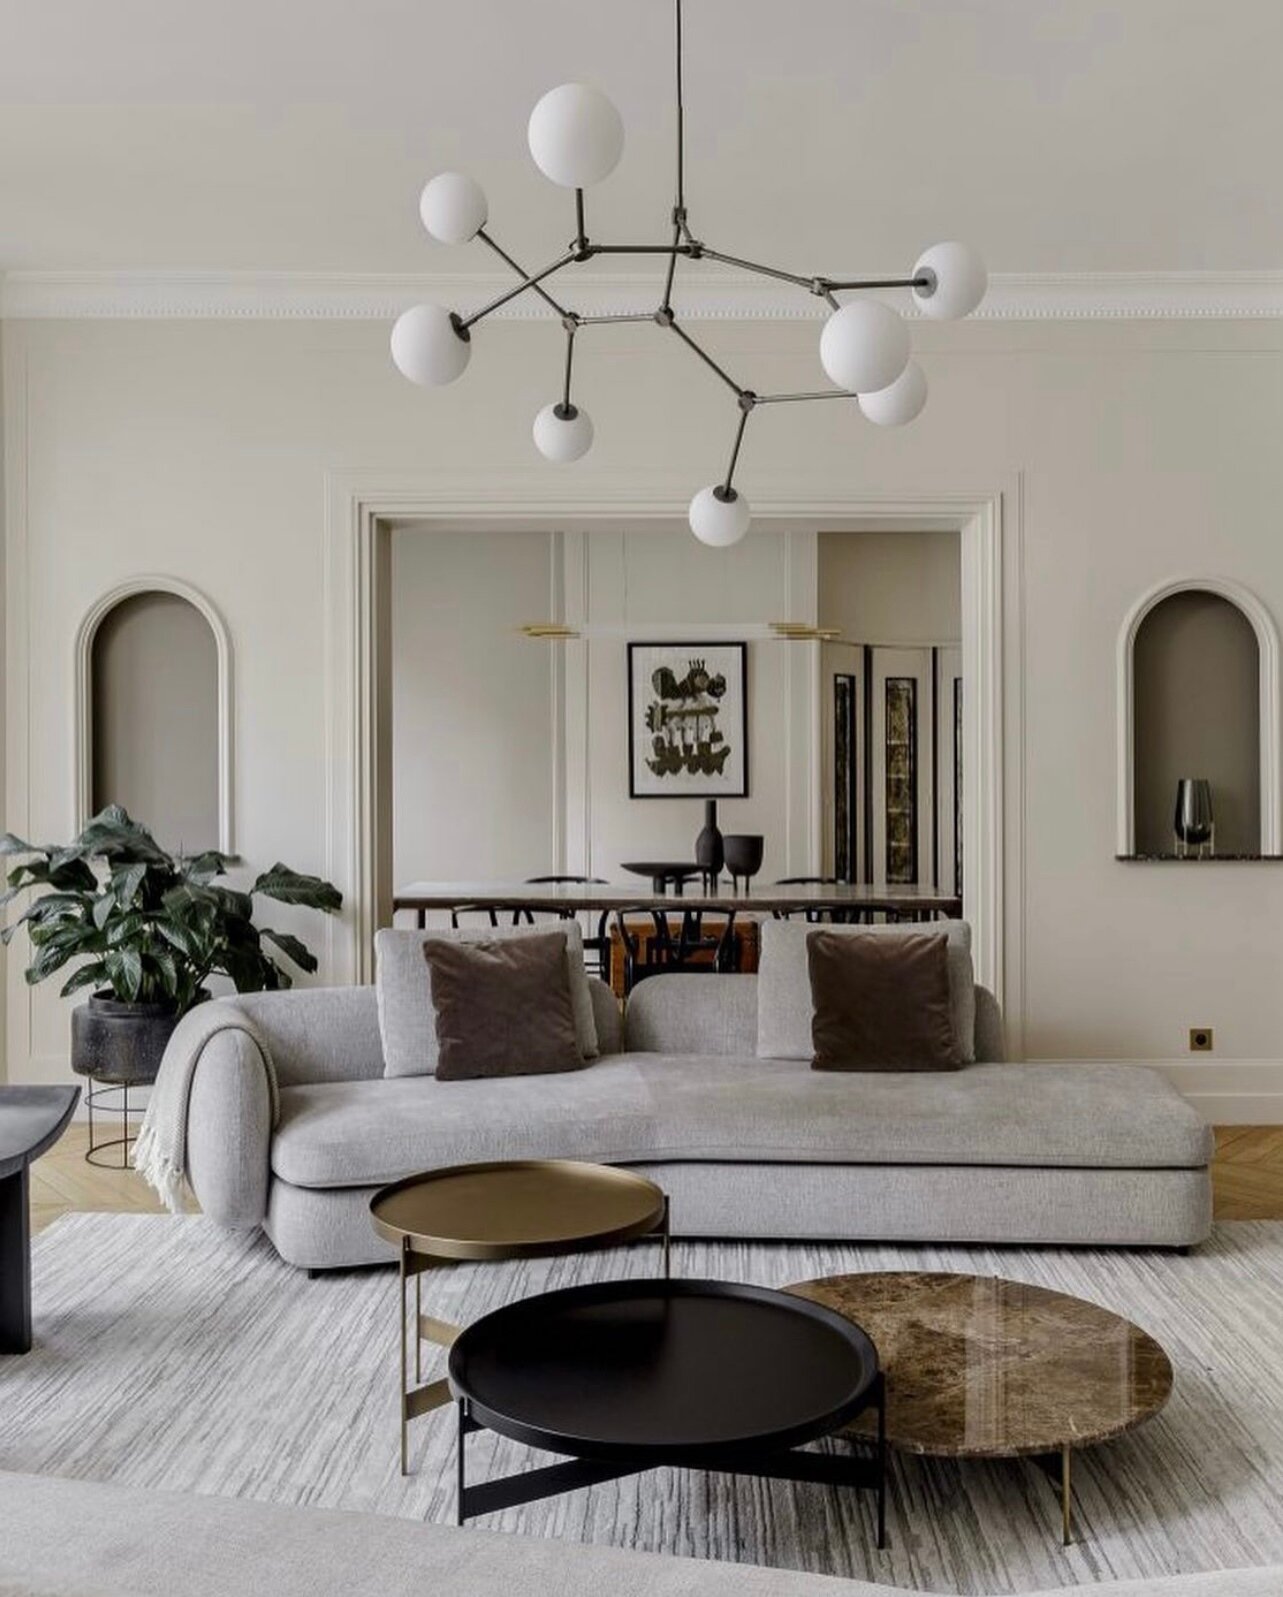 Relaxing and elegant. Loving that light fixture! (Design by @chadi.abou.jaoude) #ALTforLiving #DesignerCrush⁠
.⁠
.⁠
.⁠
.⁠
.⁠
.⁠
#ALTInteriors #NYCInteriors #LivingRoomDesign #CoffeeTable #LivingRoom #InteriorDesign #Interiors #Design #HomeDesign #Int